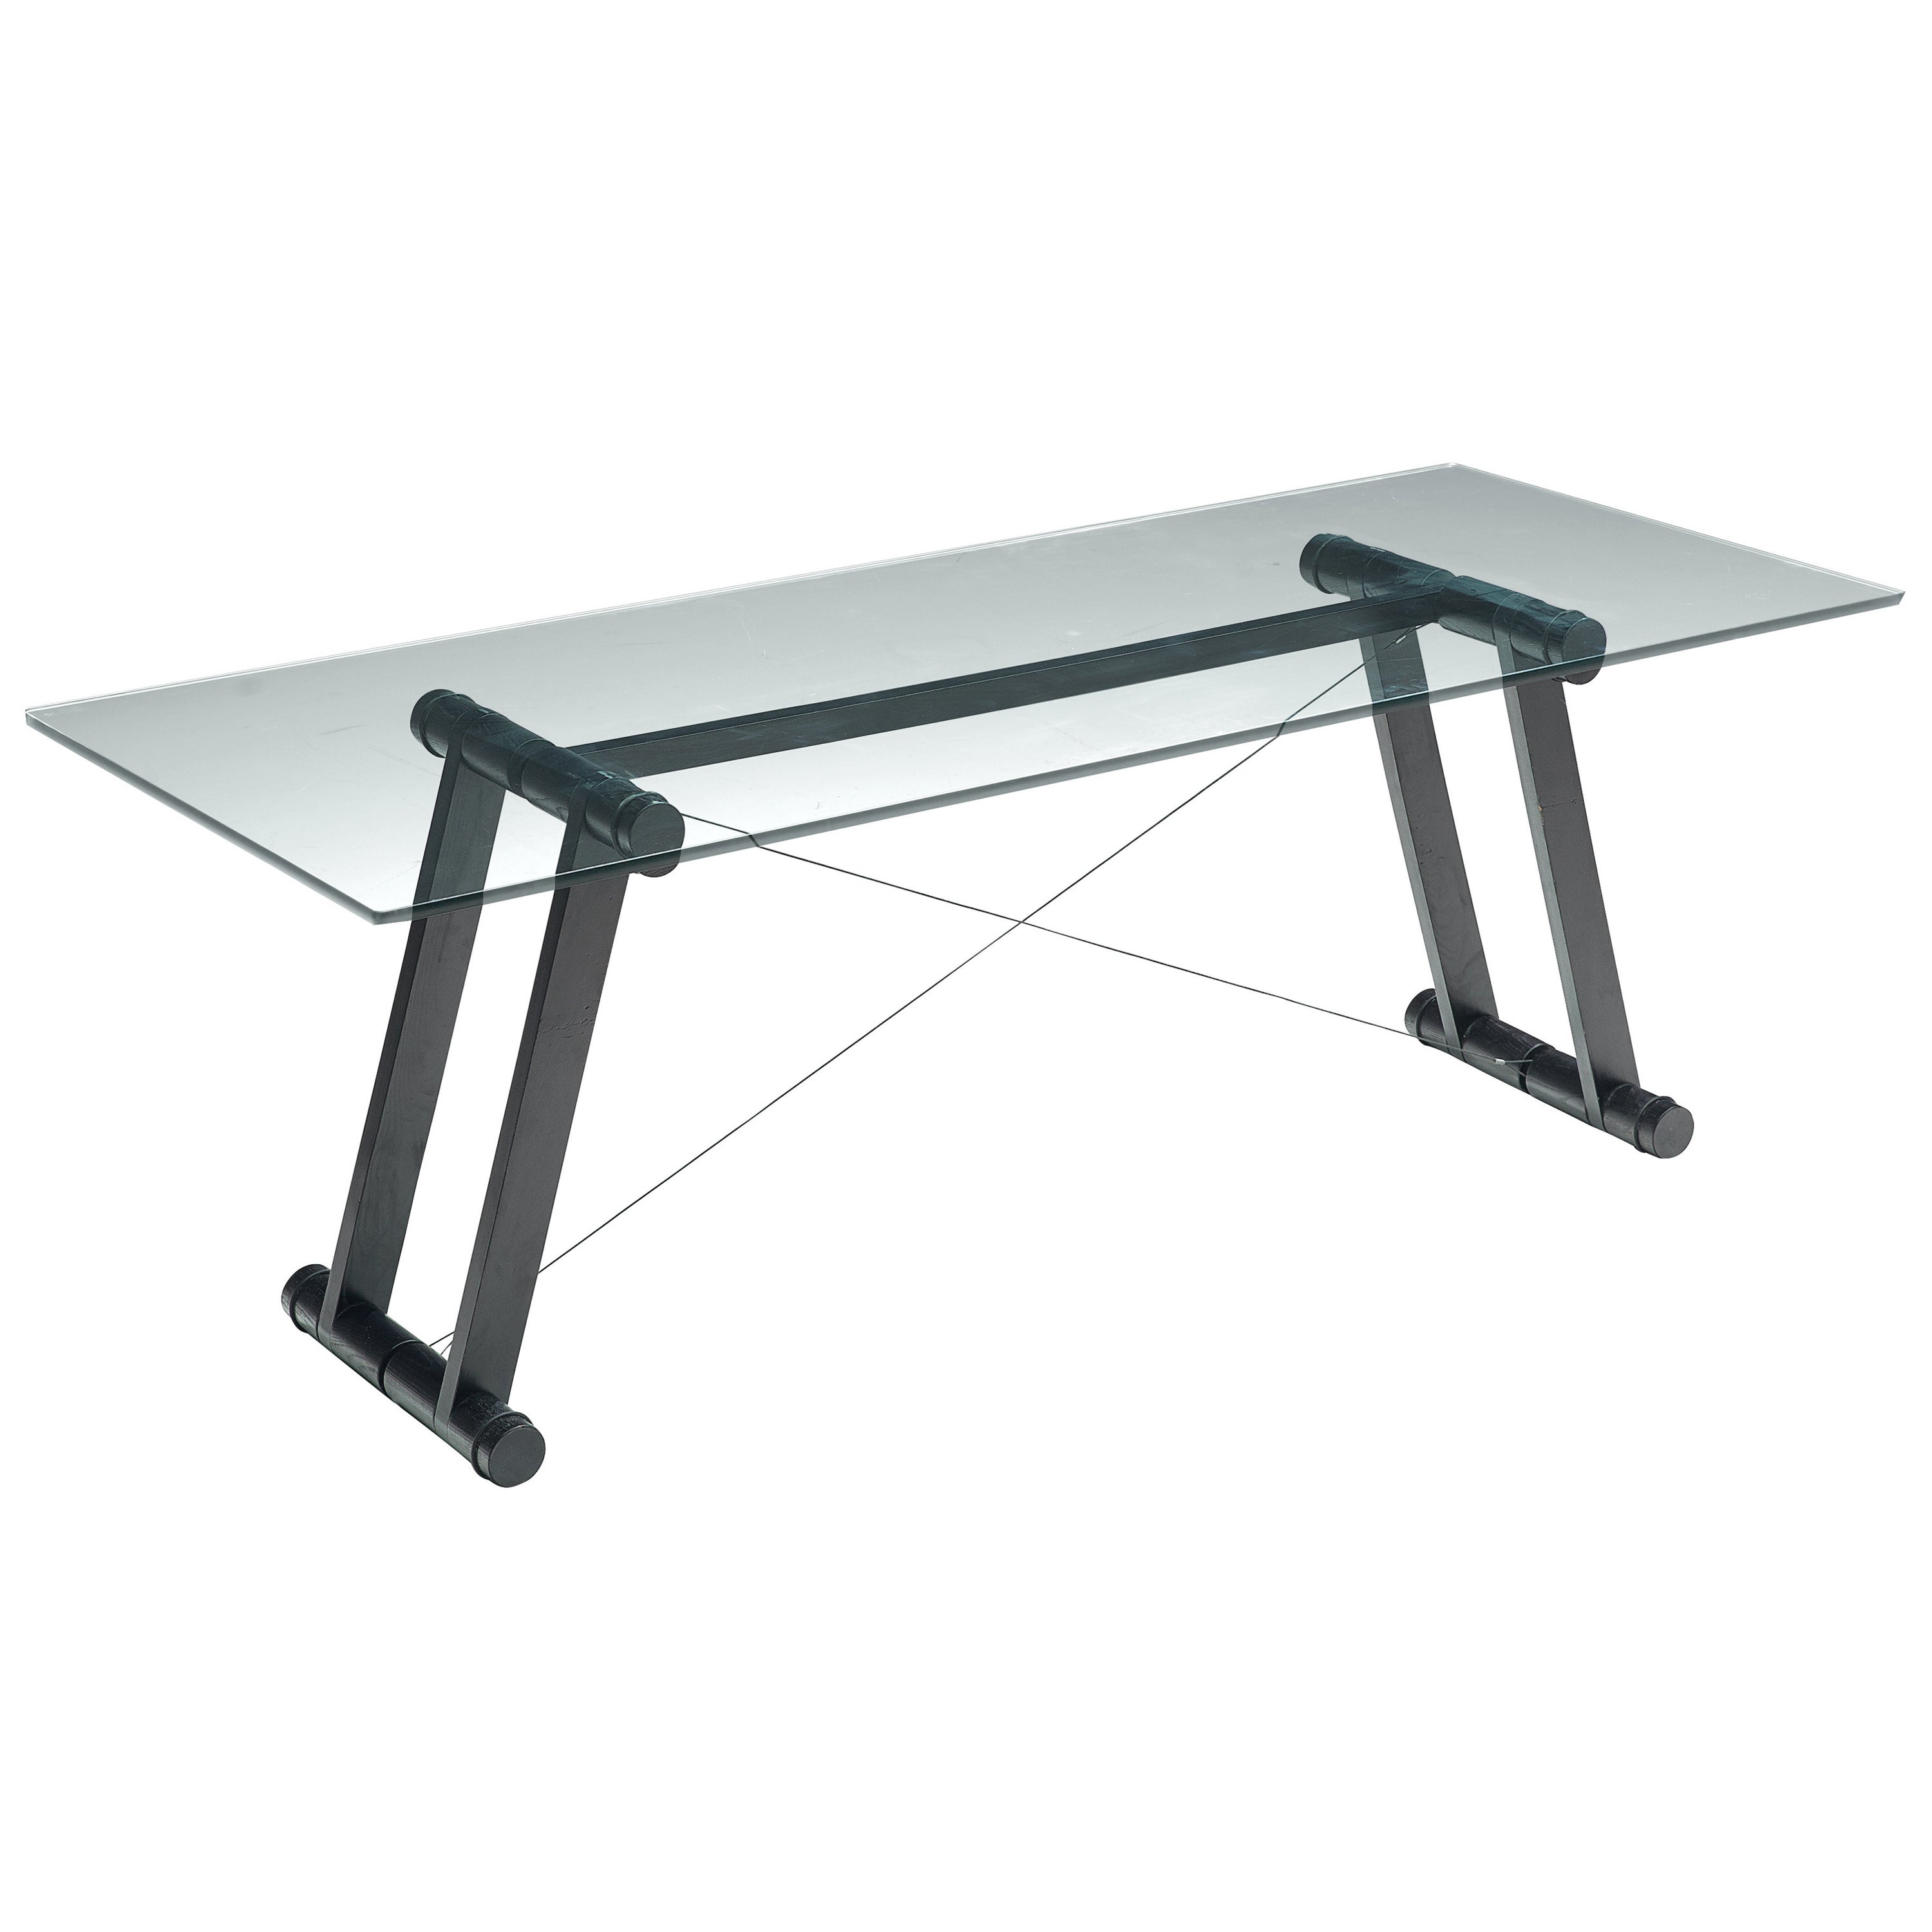 Superstudio 'Teso' Dining Table with Glass Top and Metal Base